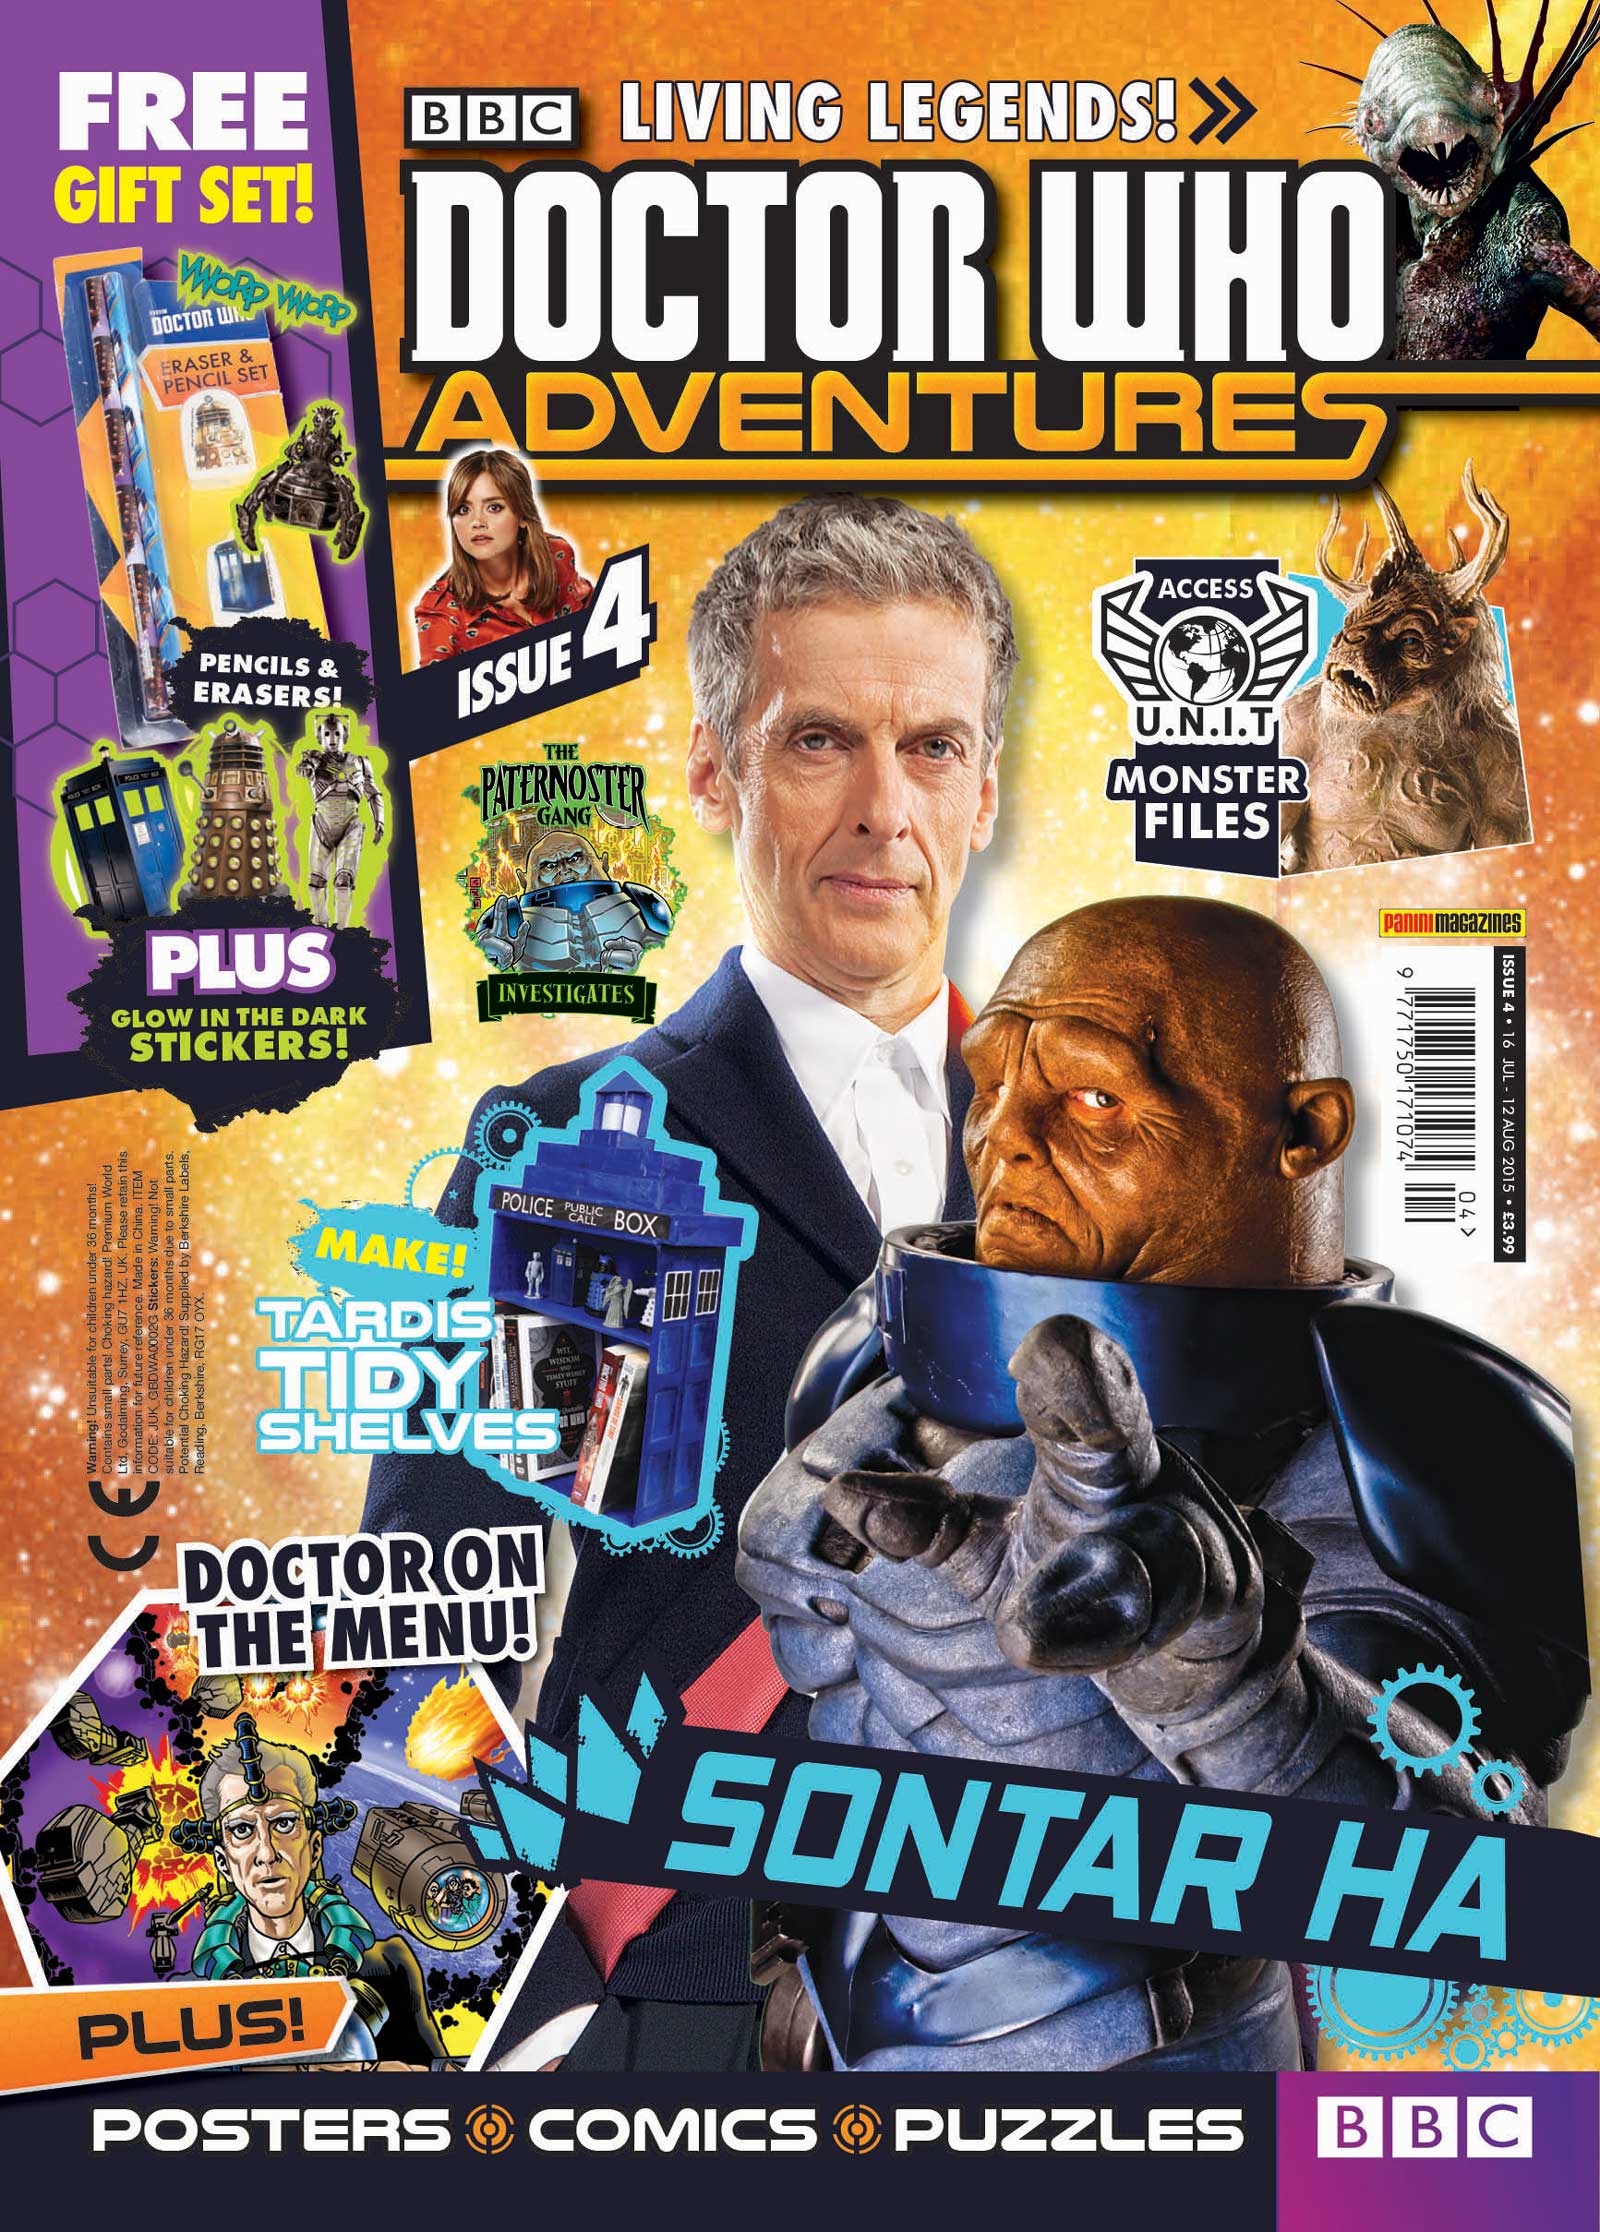 Doctor Who Adventures #4 - 2015 - Cover